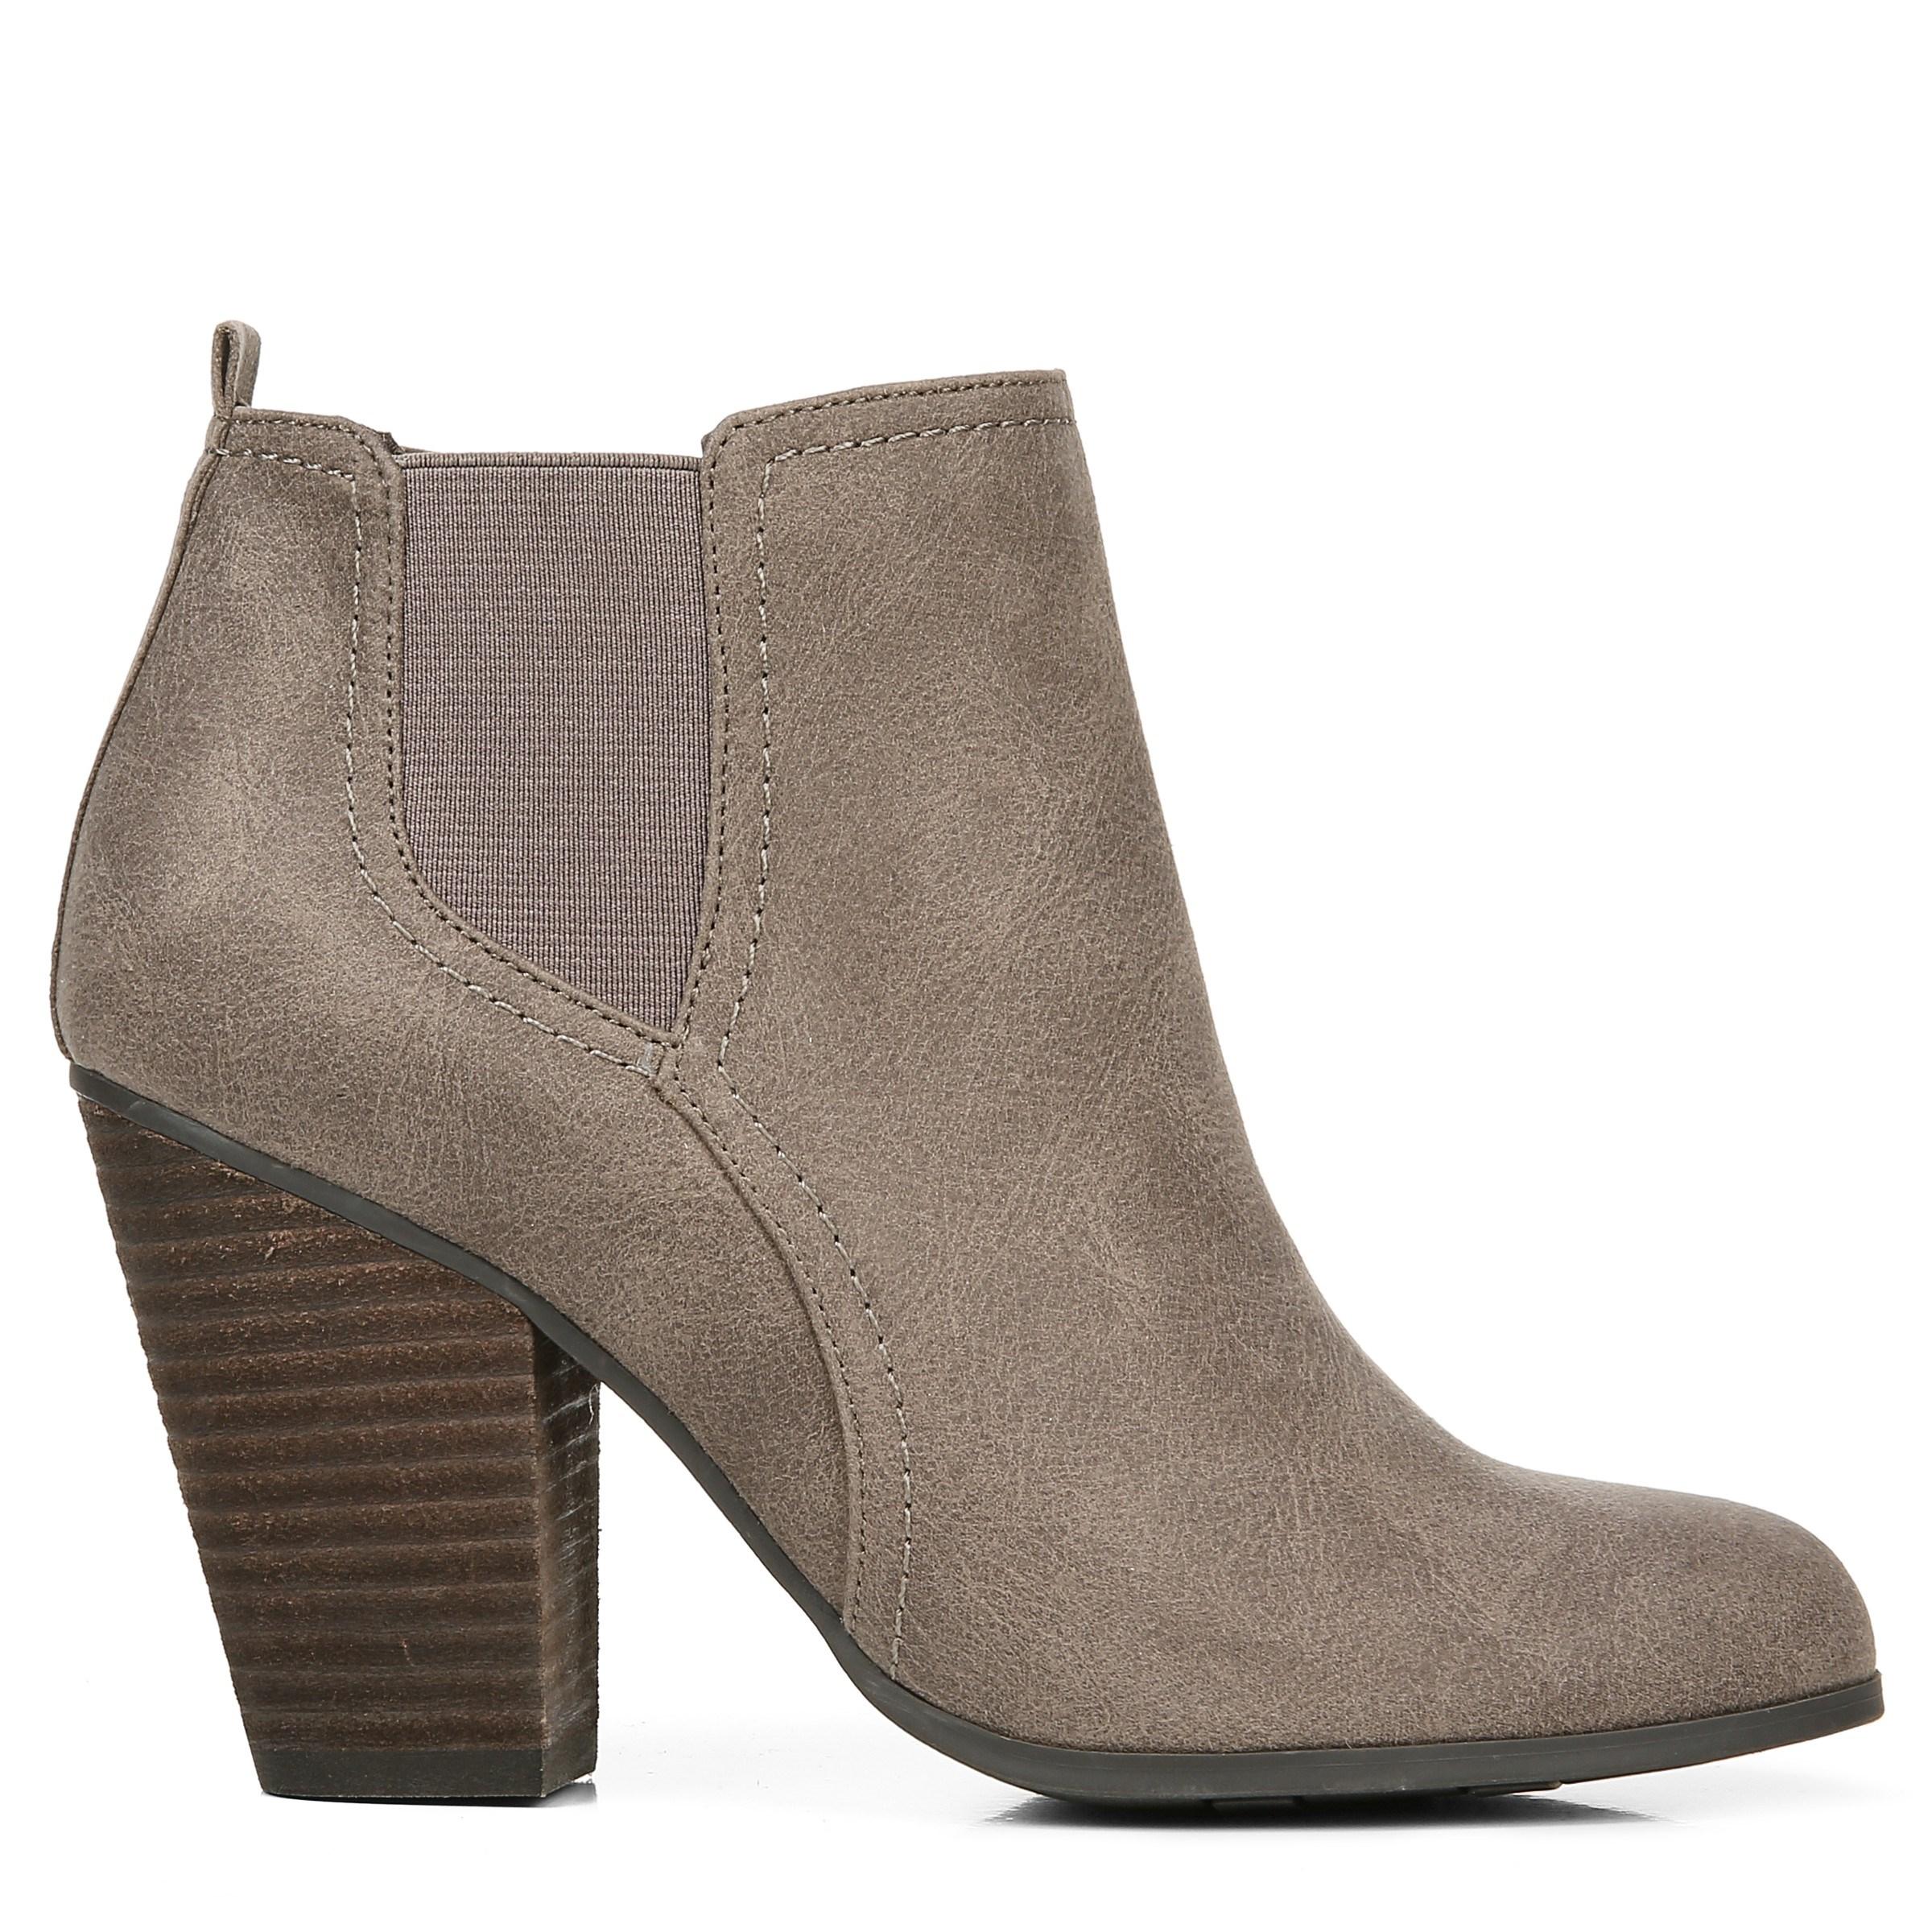 Fergie Pardee Ankle Boots in Brown - Lyst